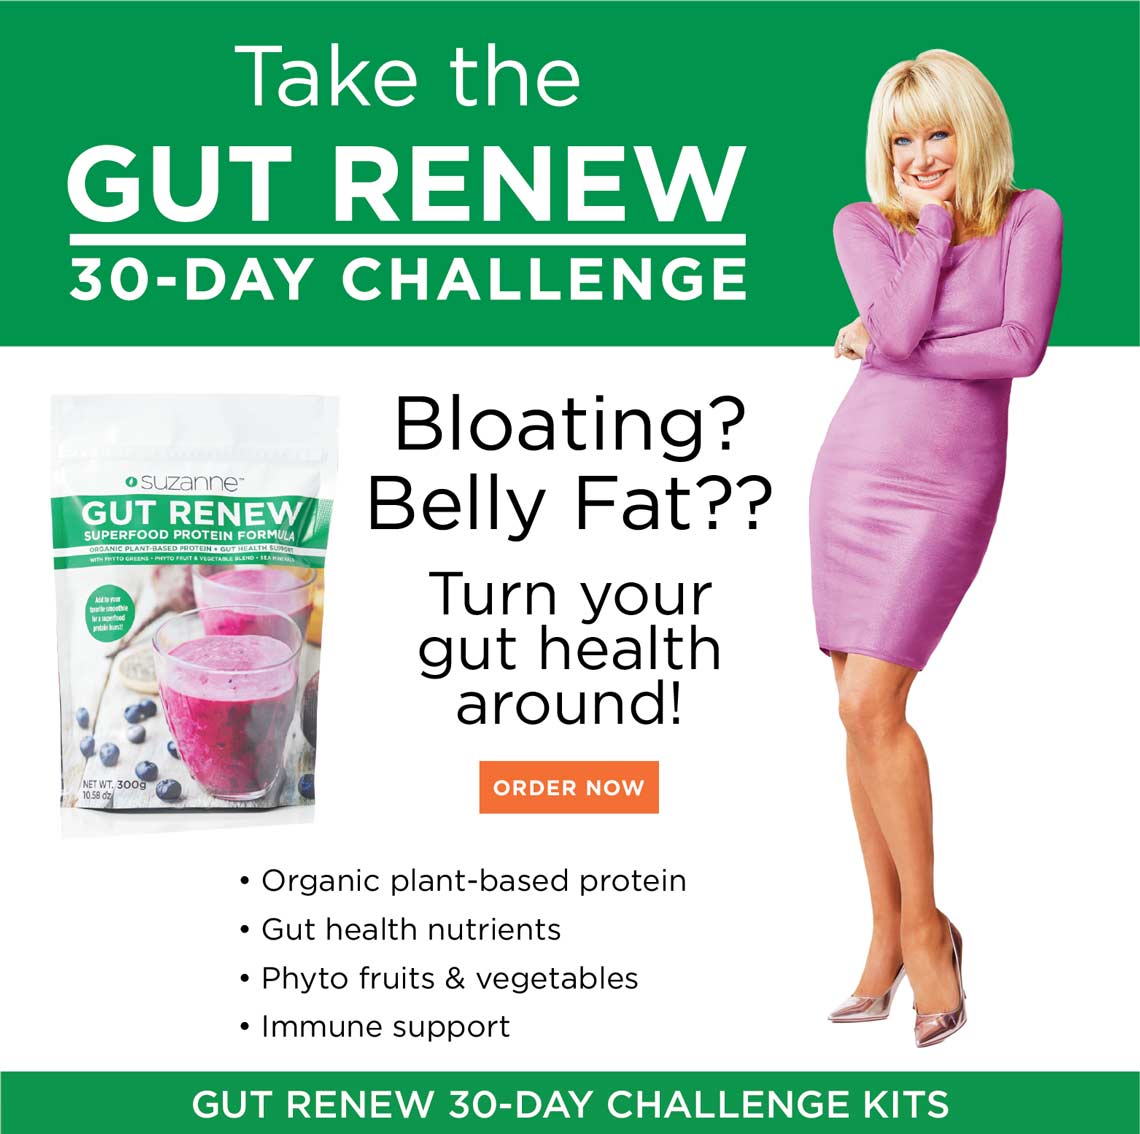  Bloating? Belly Fat?? Turn your gut health around! Organic plant-based protein • Phyto fruits & vegetables • Immune support • Gut health nutrients 2 smoothies plus one healthy meal per day